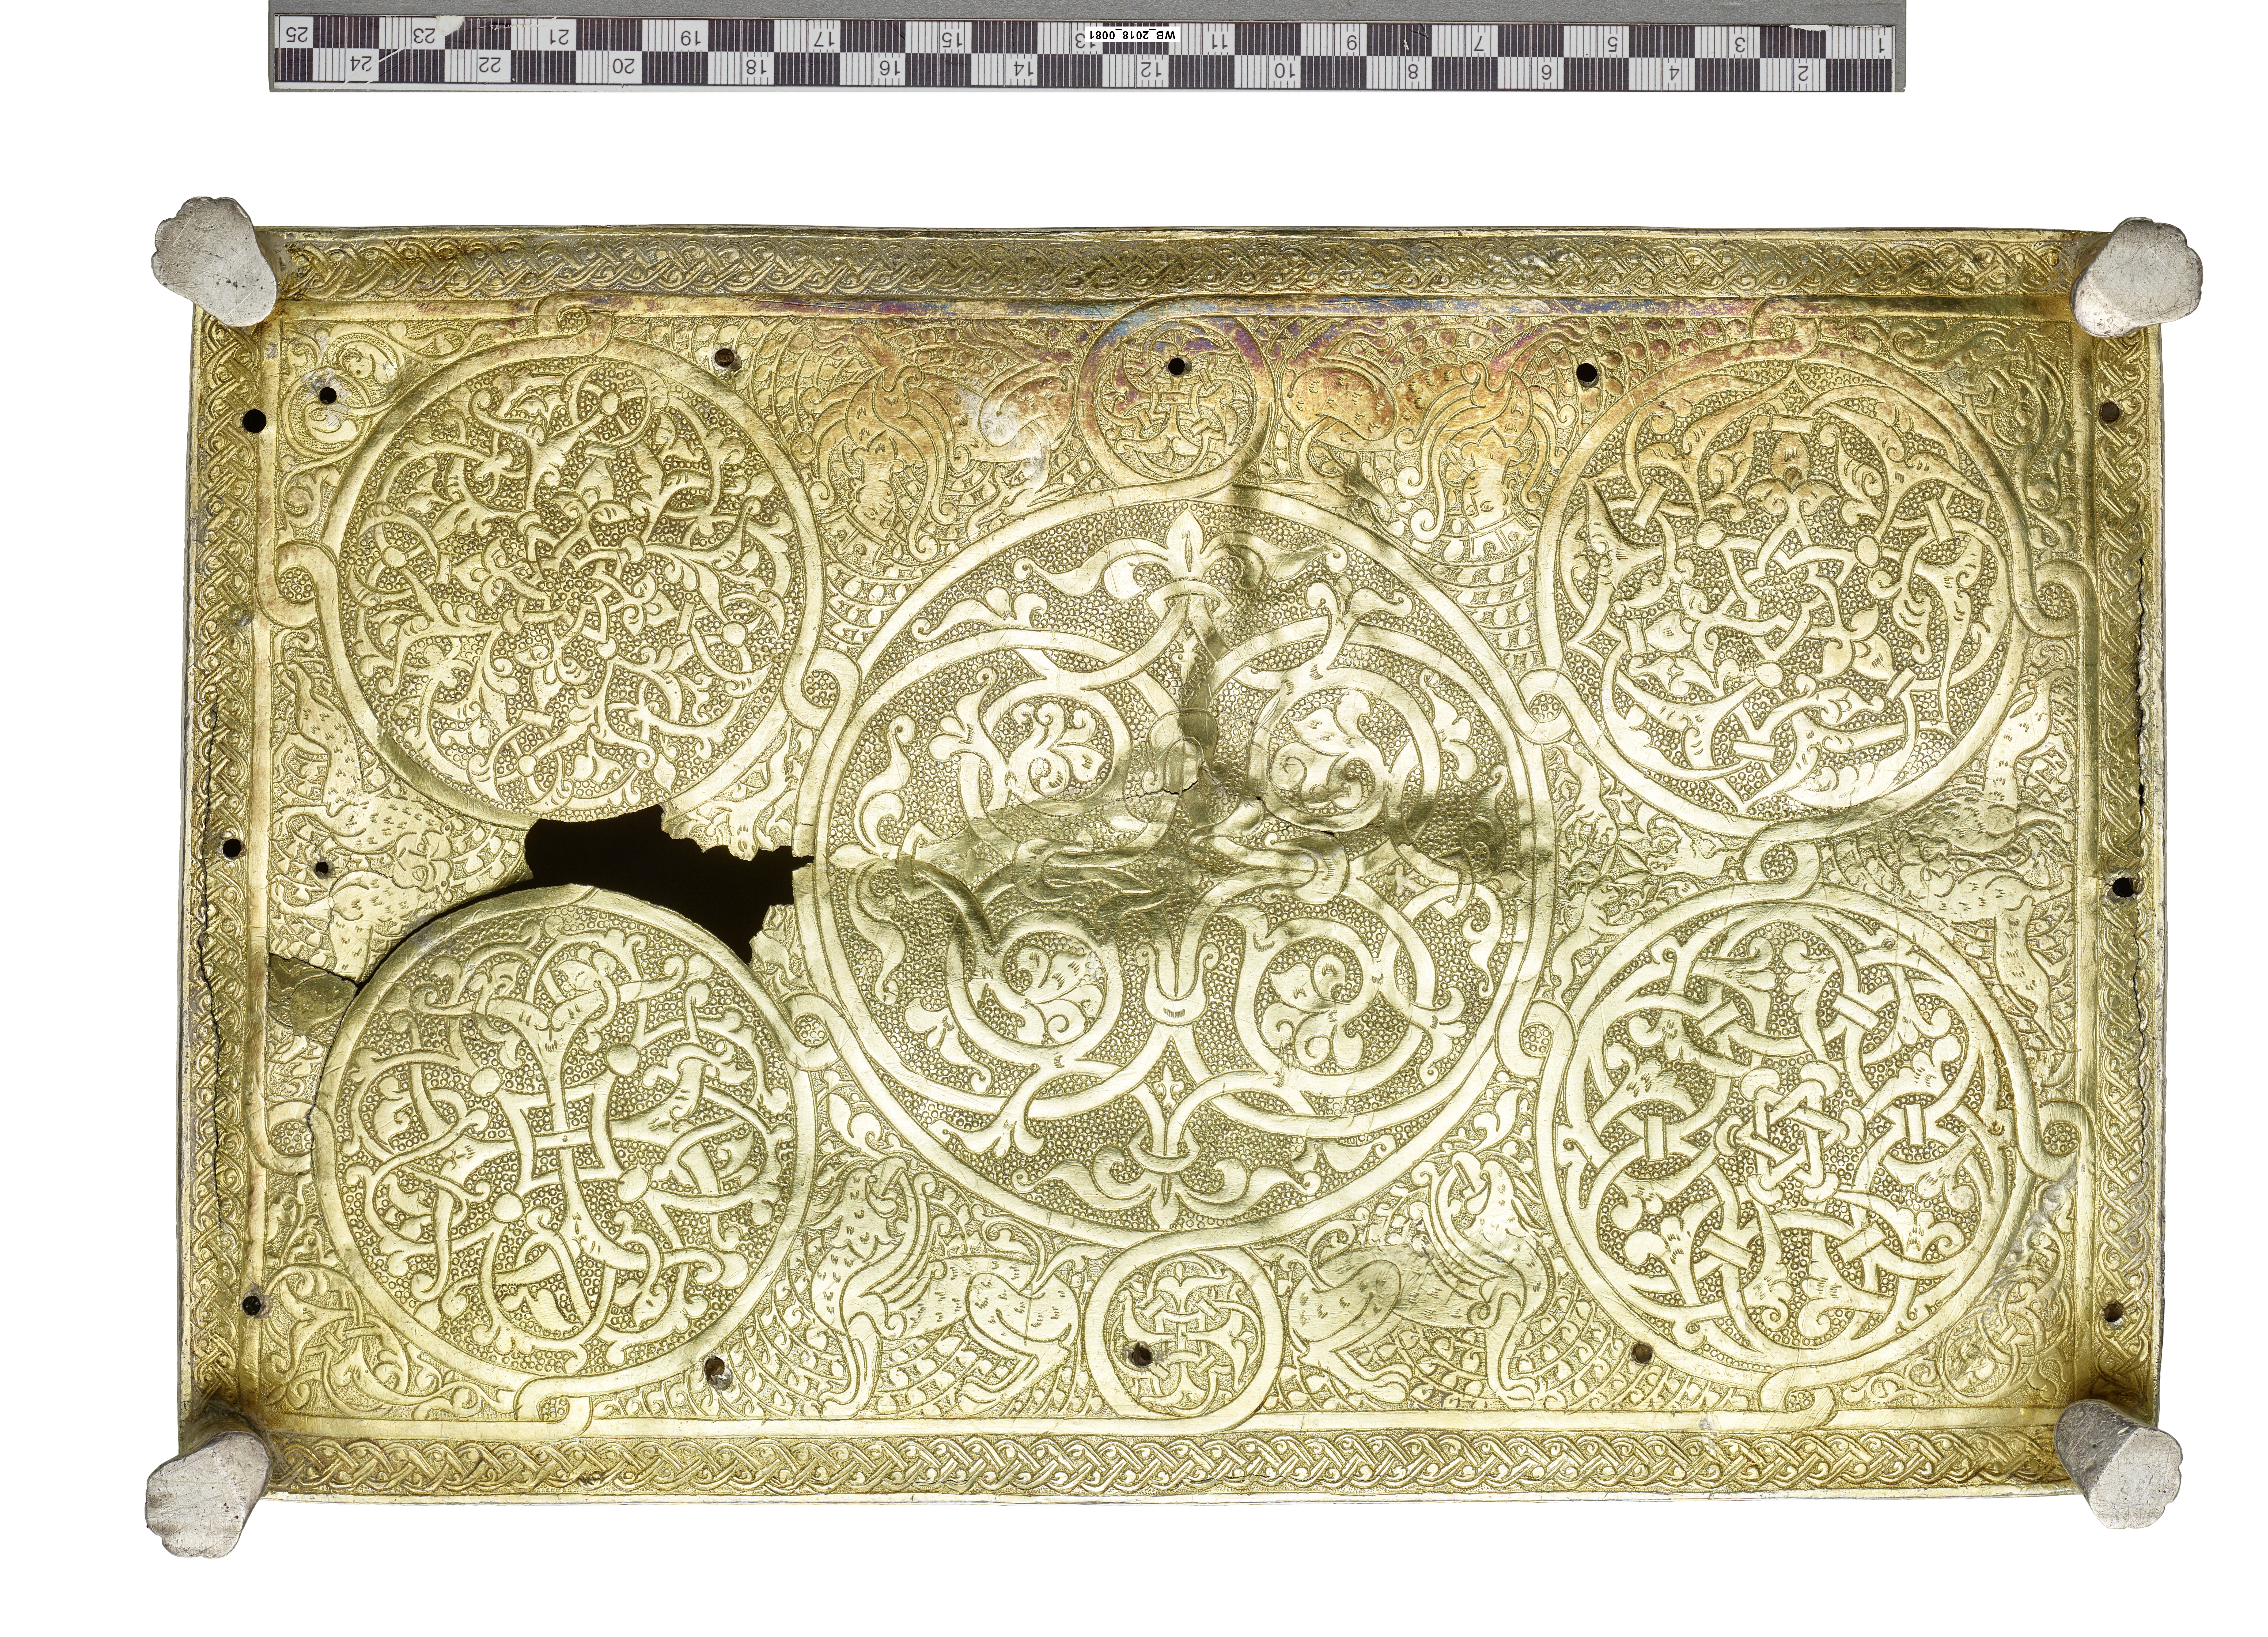 Bottom plate of Trier silver casket with chased design. Five medallions, fabulous creatures and hares in spandrels.